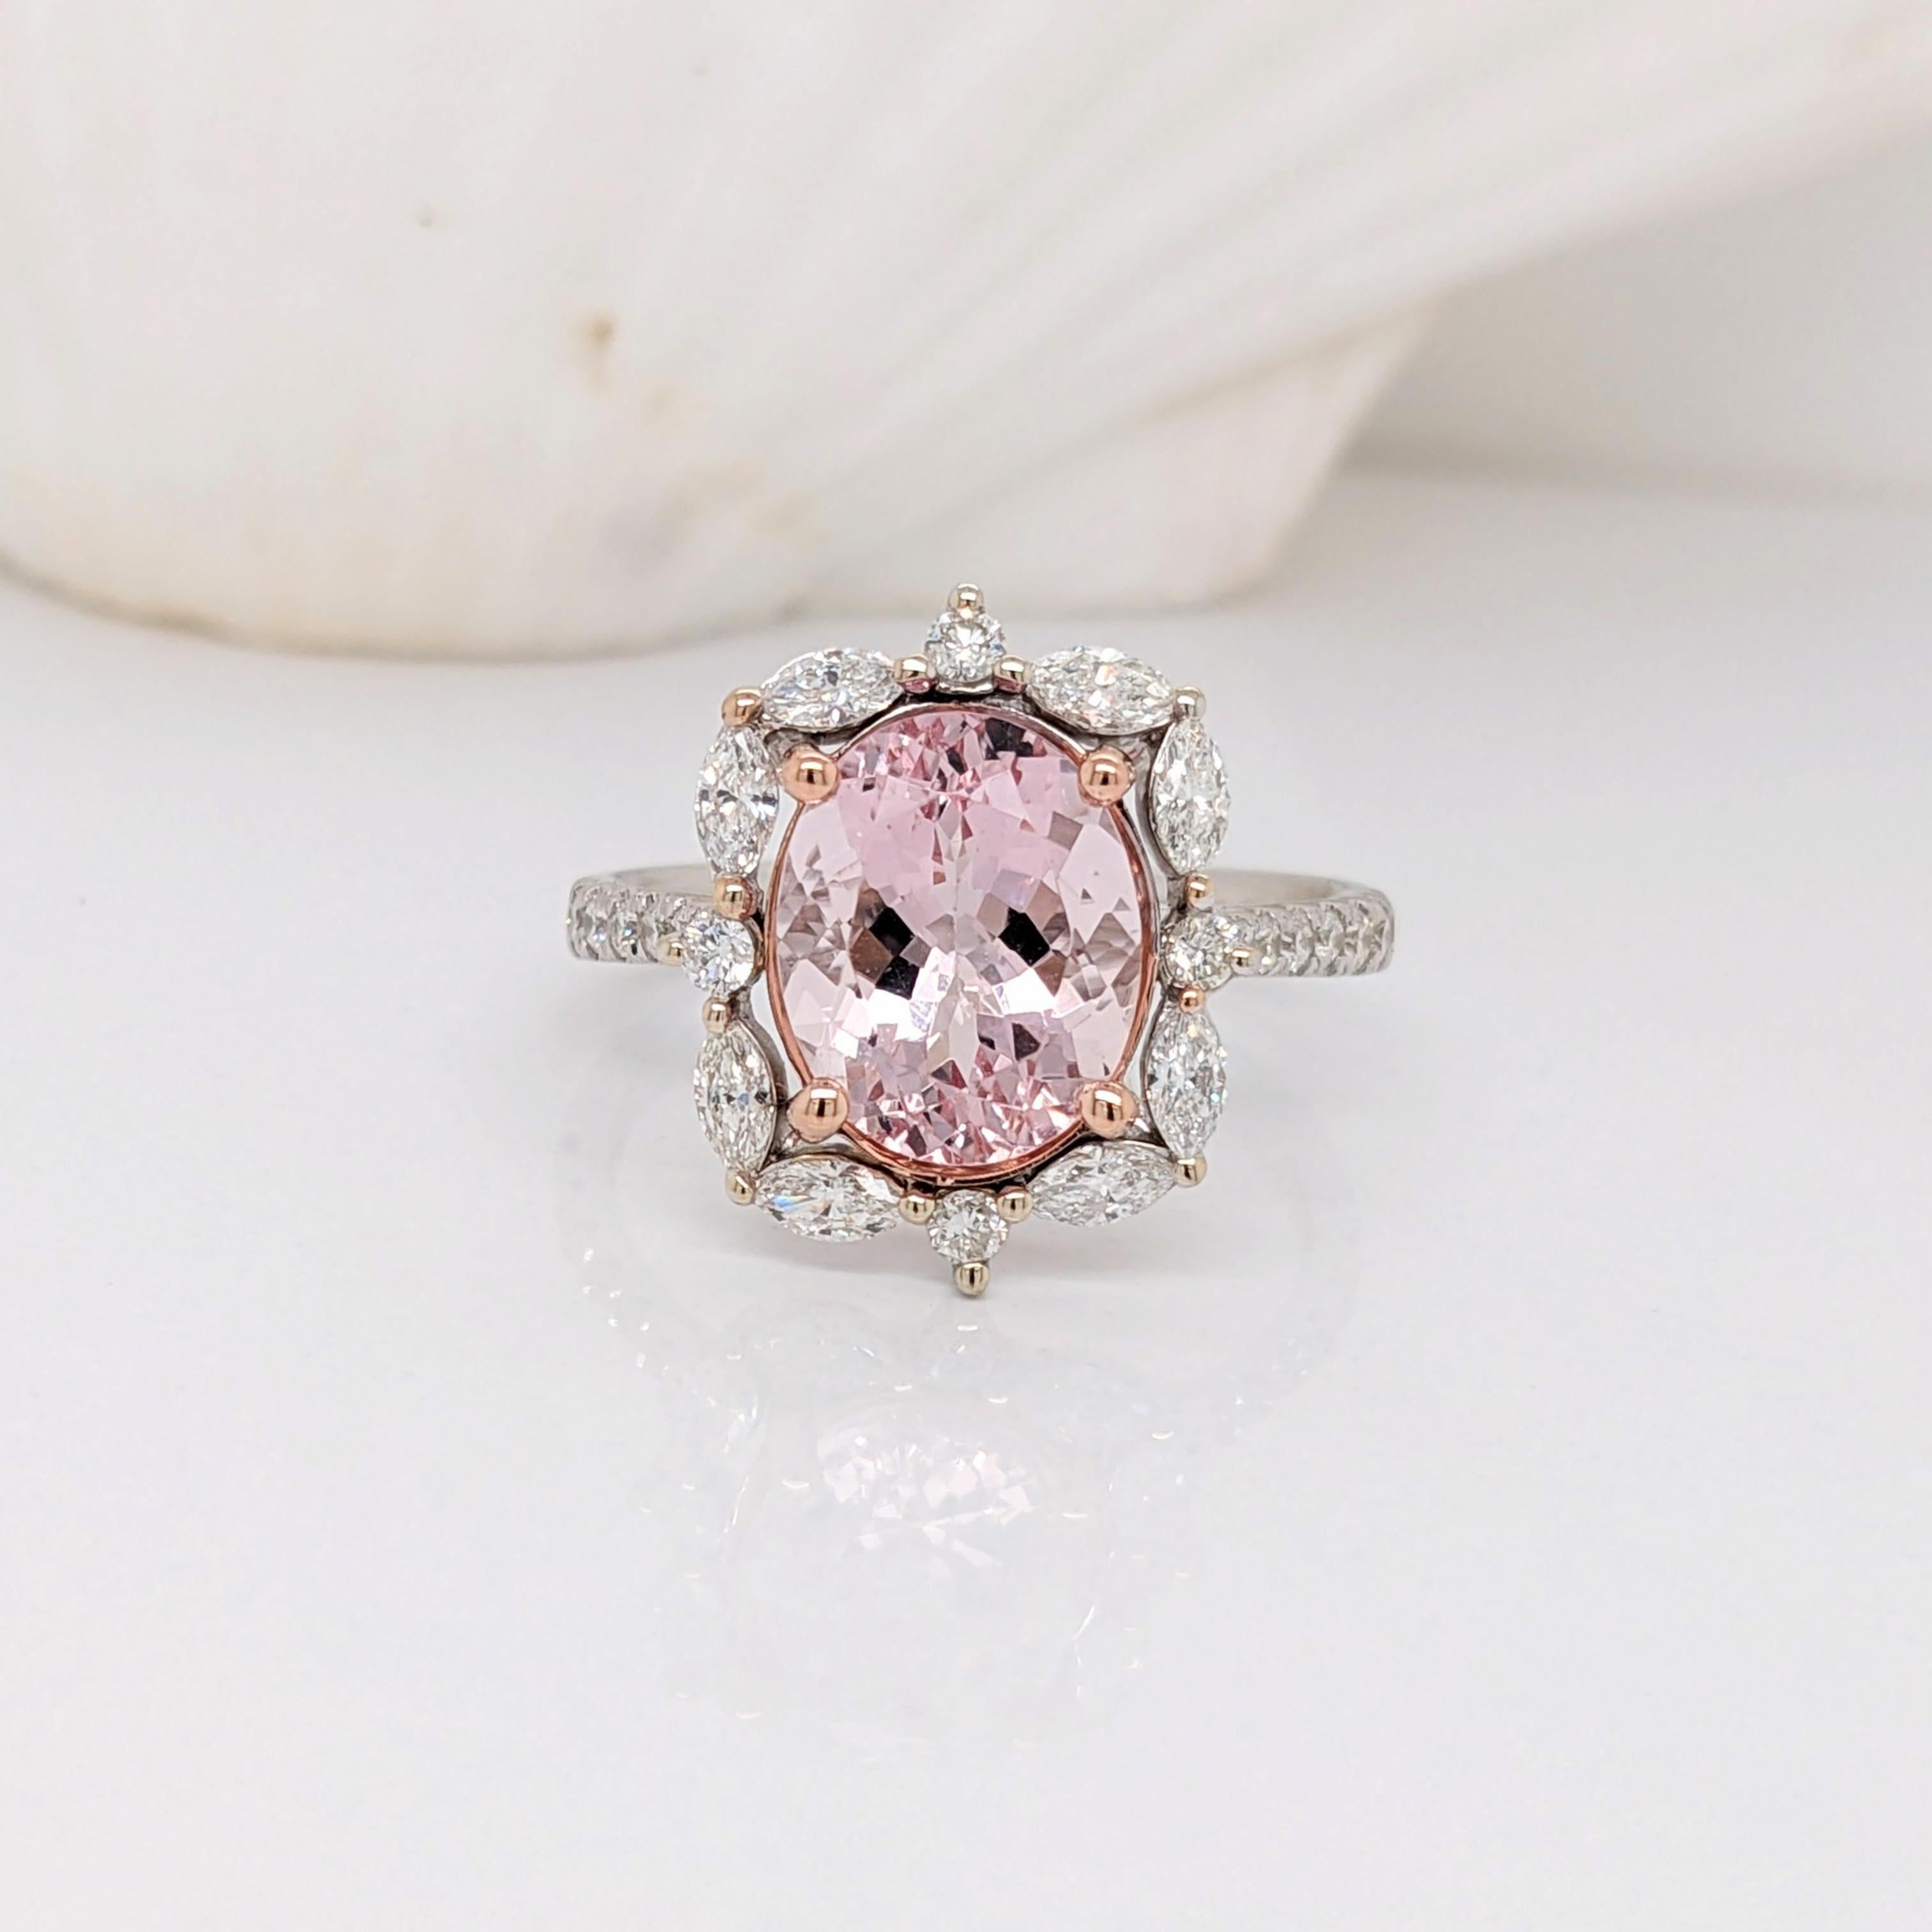 Stone : Pink Morganite
Treatment : Heated
Hardness : 7.5-8
Shape : Round
Cut : Faceted
Size : 2.89cts
Metal : Solid 14k /3.05gms
Diamonds SI GH: 28/0.66cts
Sku: AJR553/4324

This original NNJ Designs ring showcases a feminine pink morganite cut in a